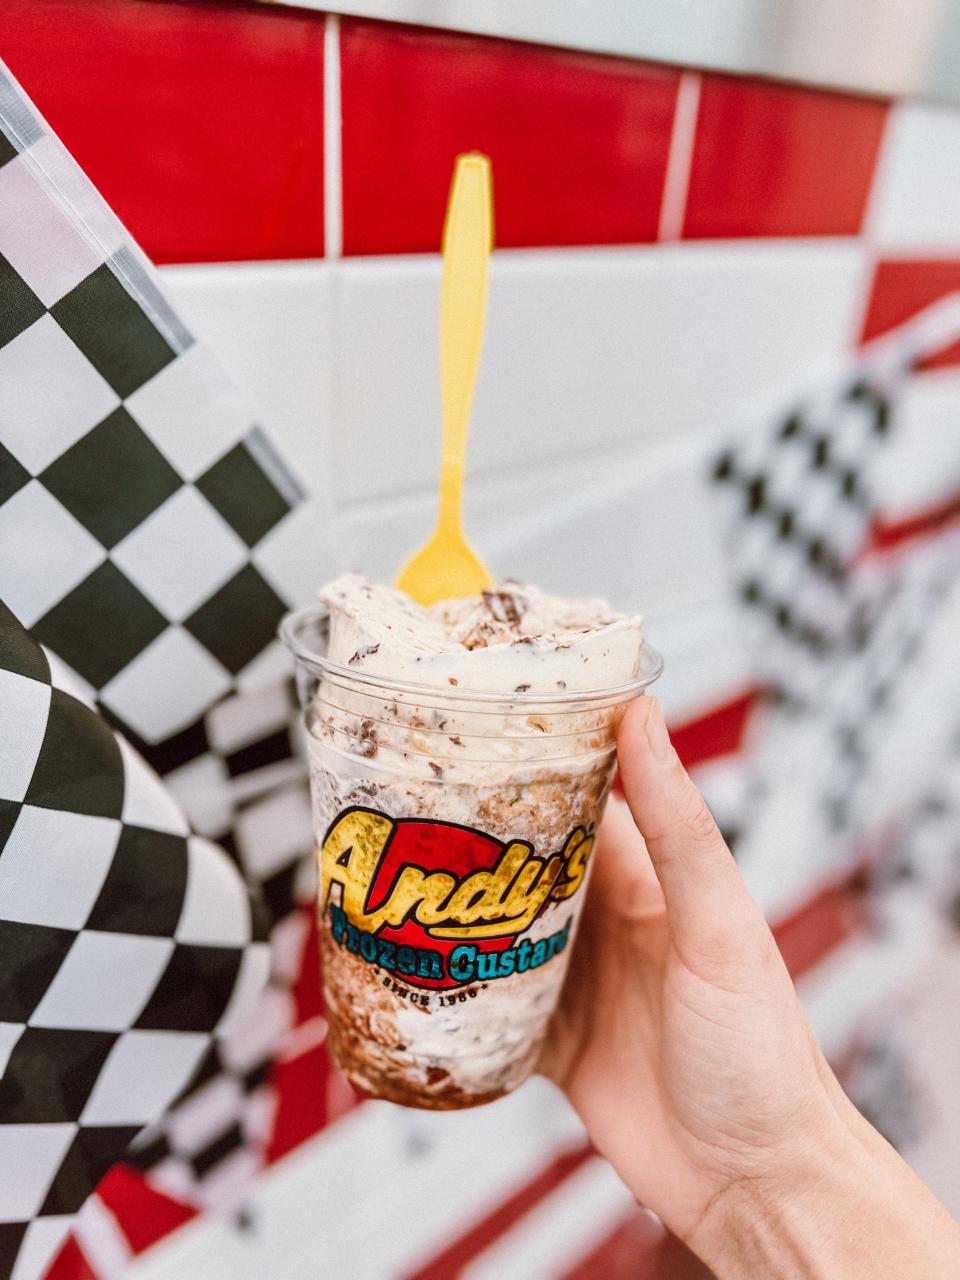 The Frozen Custer Concrete, created in collaboration with NASCAR Driver Cole Custer, is one of the newest items at Andy's Frozen Custard.